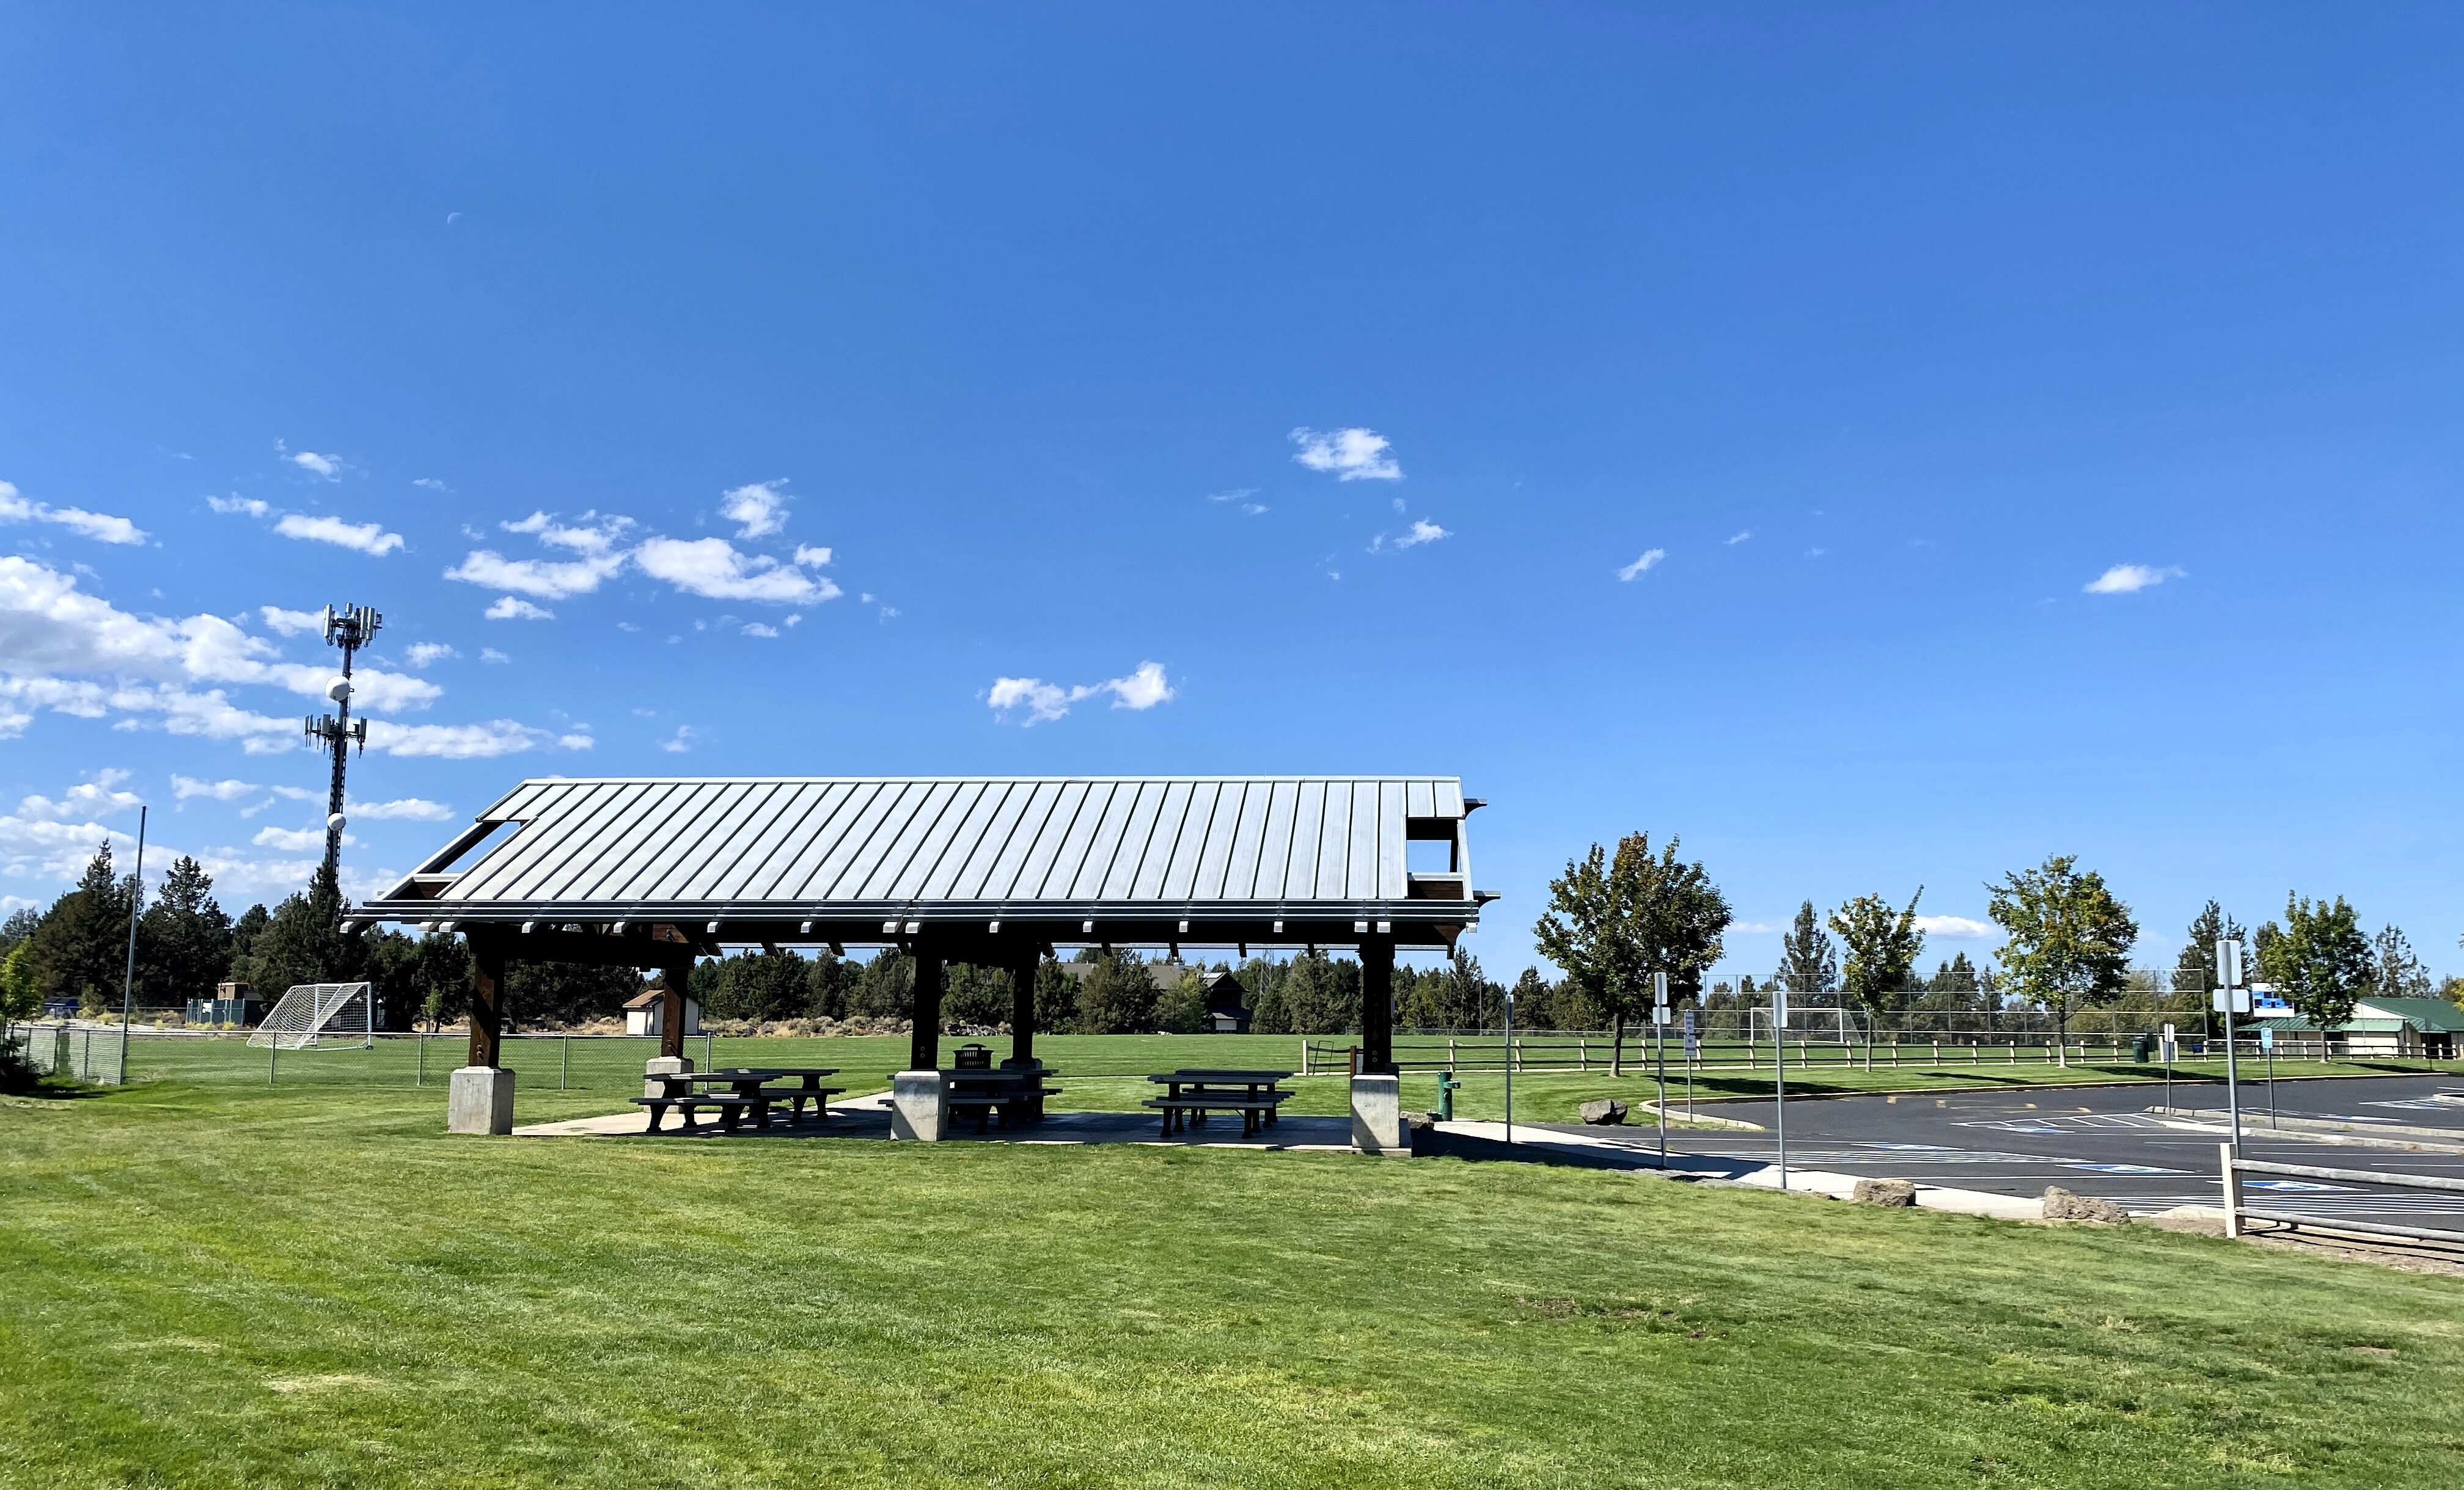 a picnic shelter at big sky park by the fields